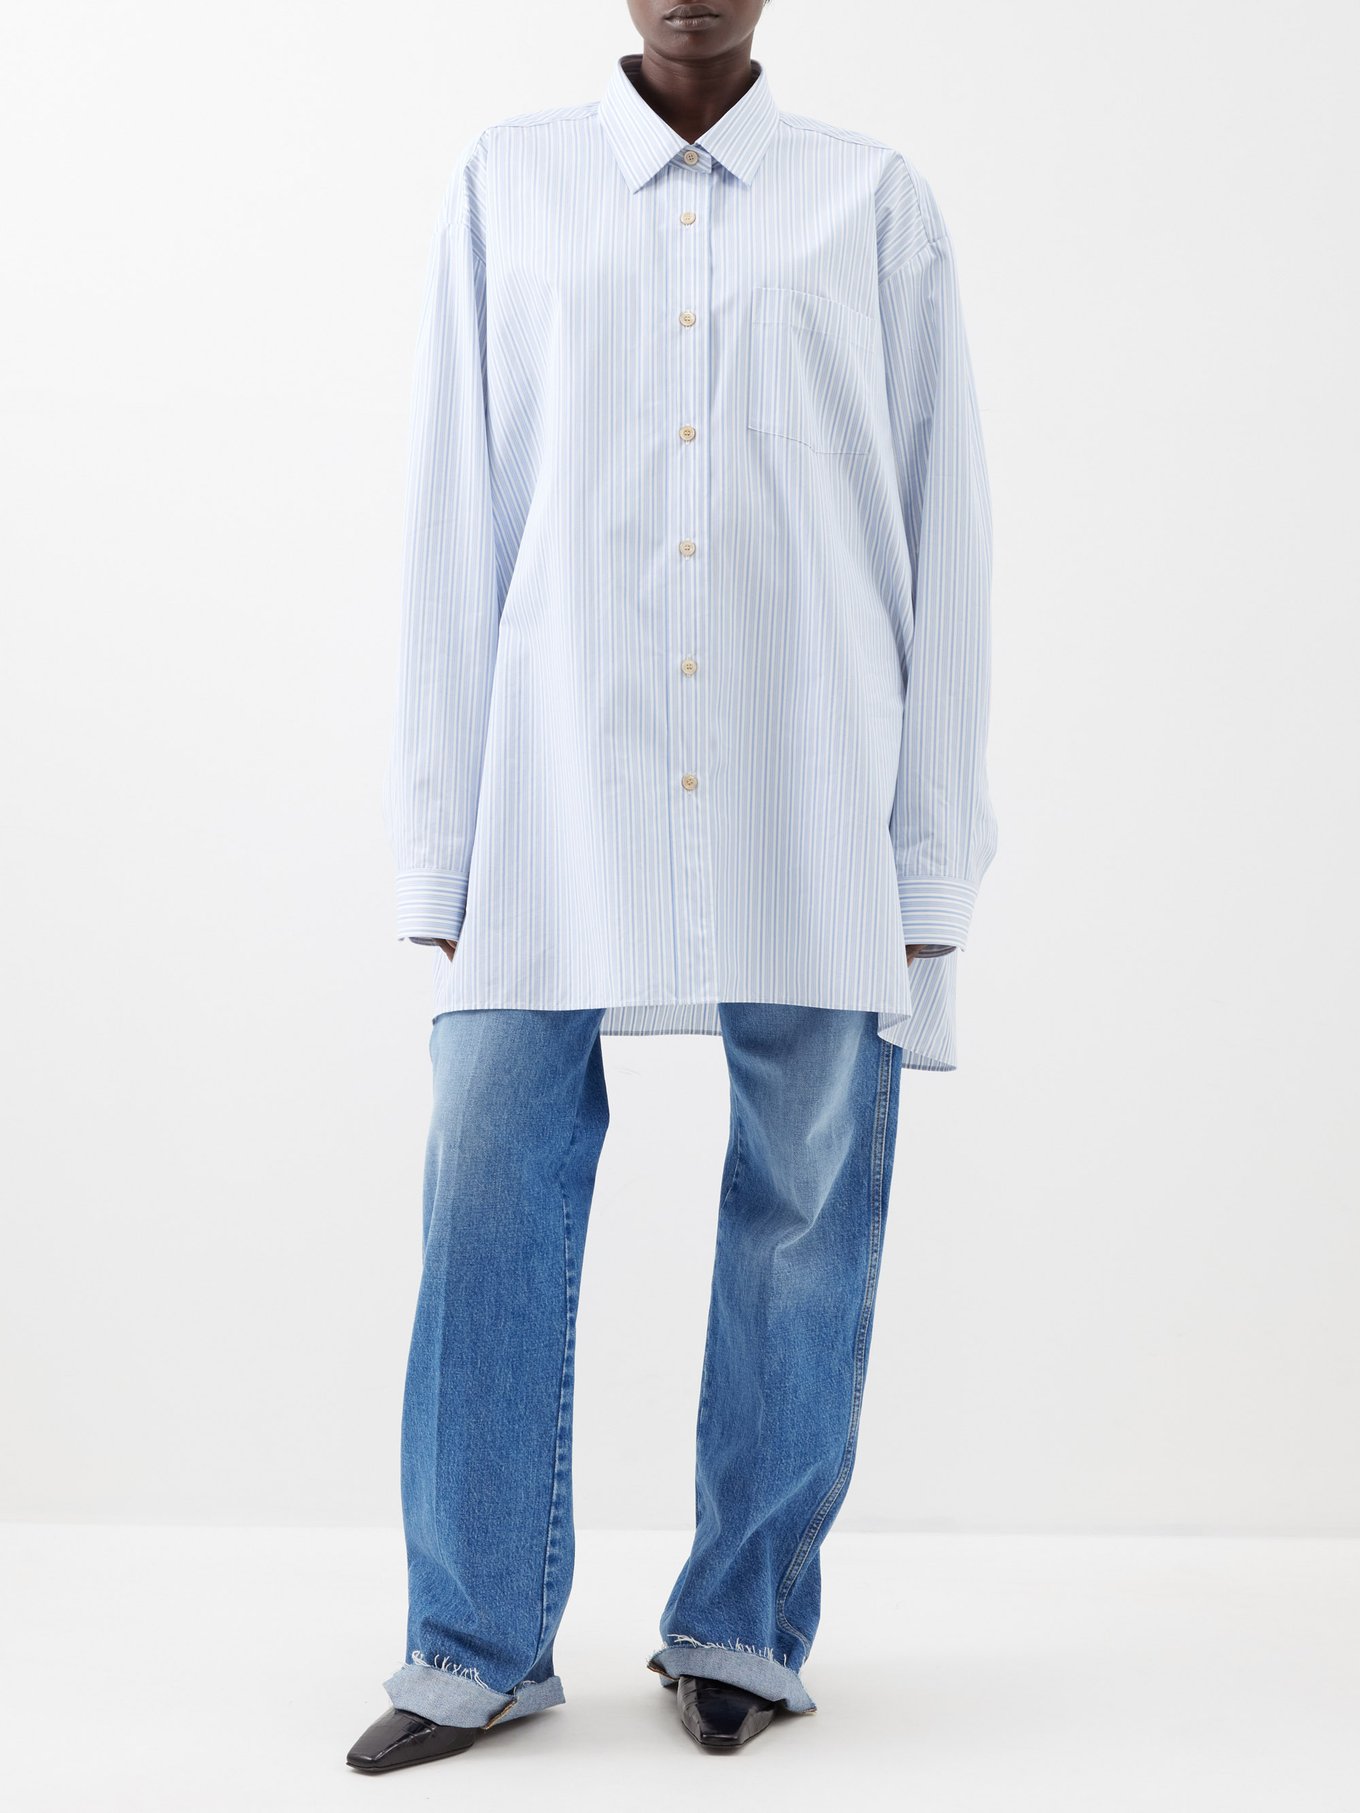 Gucci Cotton Shirt with Gucci Embroidery, Size 38 It, White, Ready-to-wear